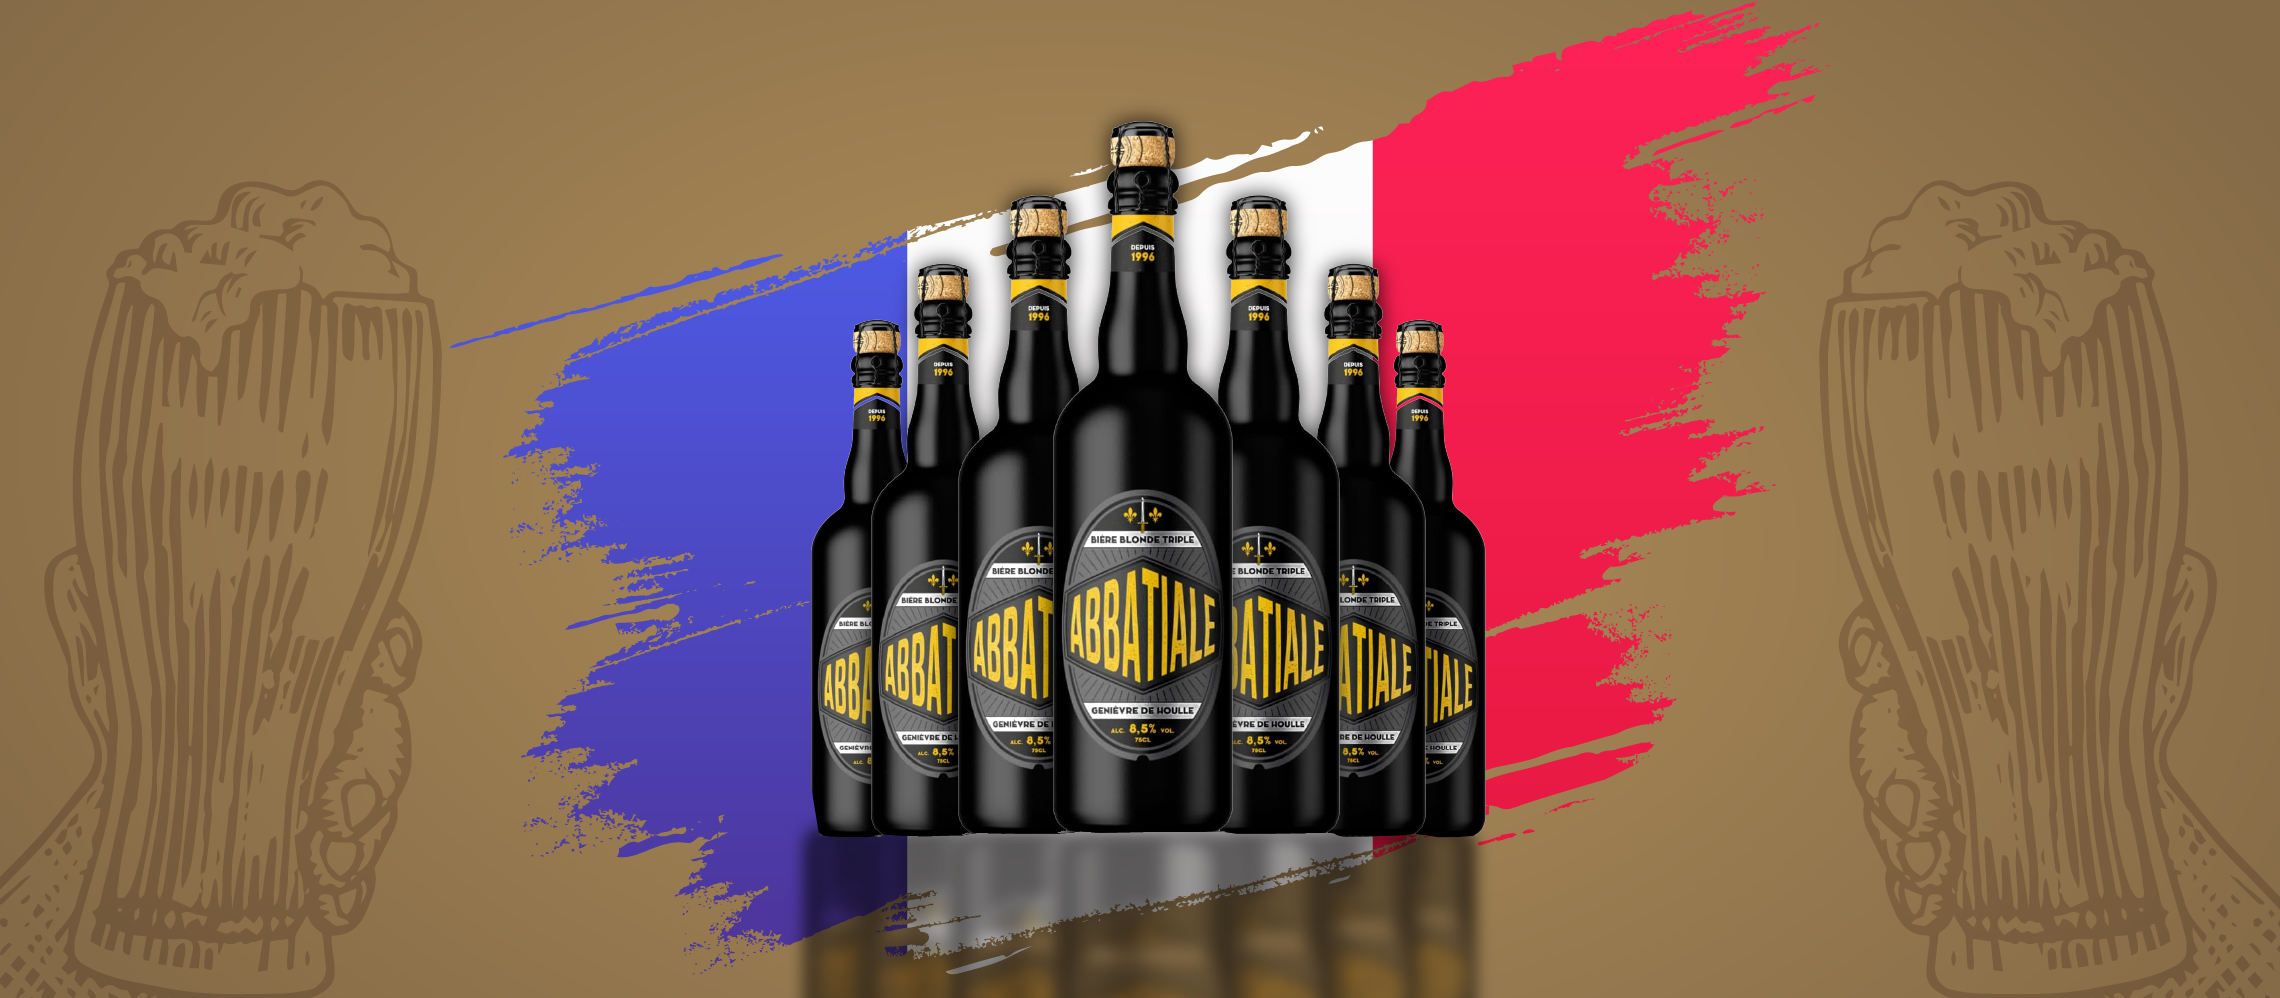 Photo for: France Takes Beer Of The Year At The 2021 London Beer Competition